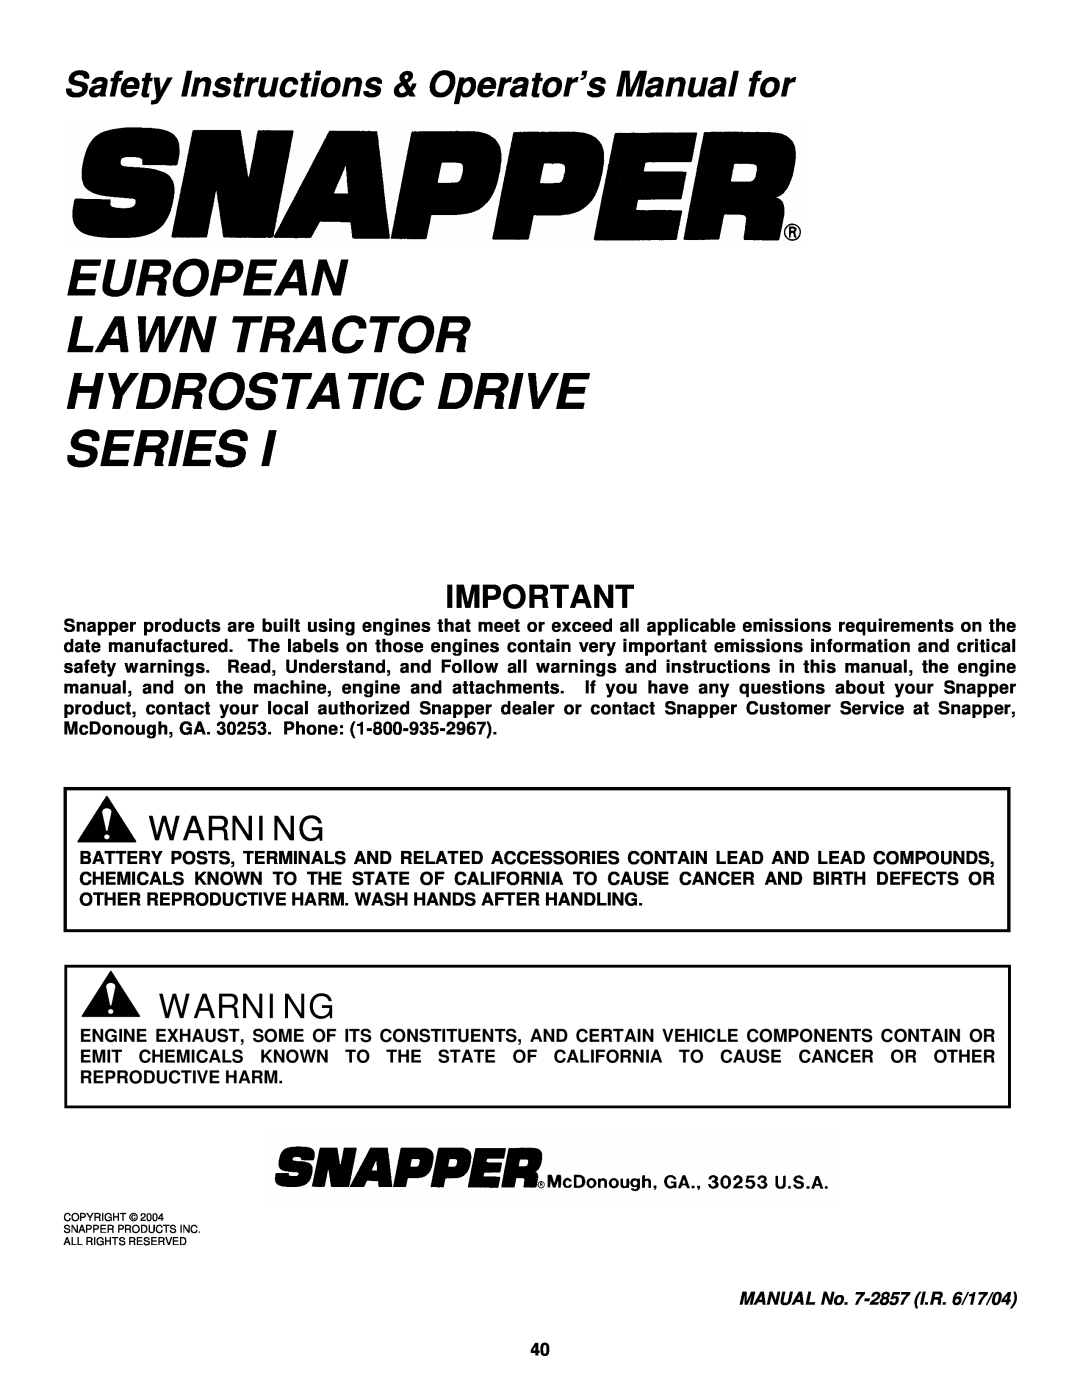 Snapper ELT180H33IBV European Lawn Tractor Hydrostatic Drive Series, Safety Instructions & Operator’s Manual for 